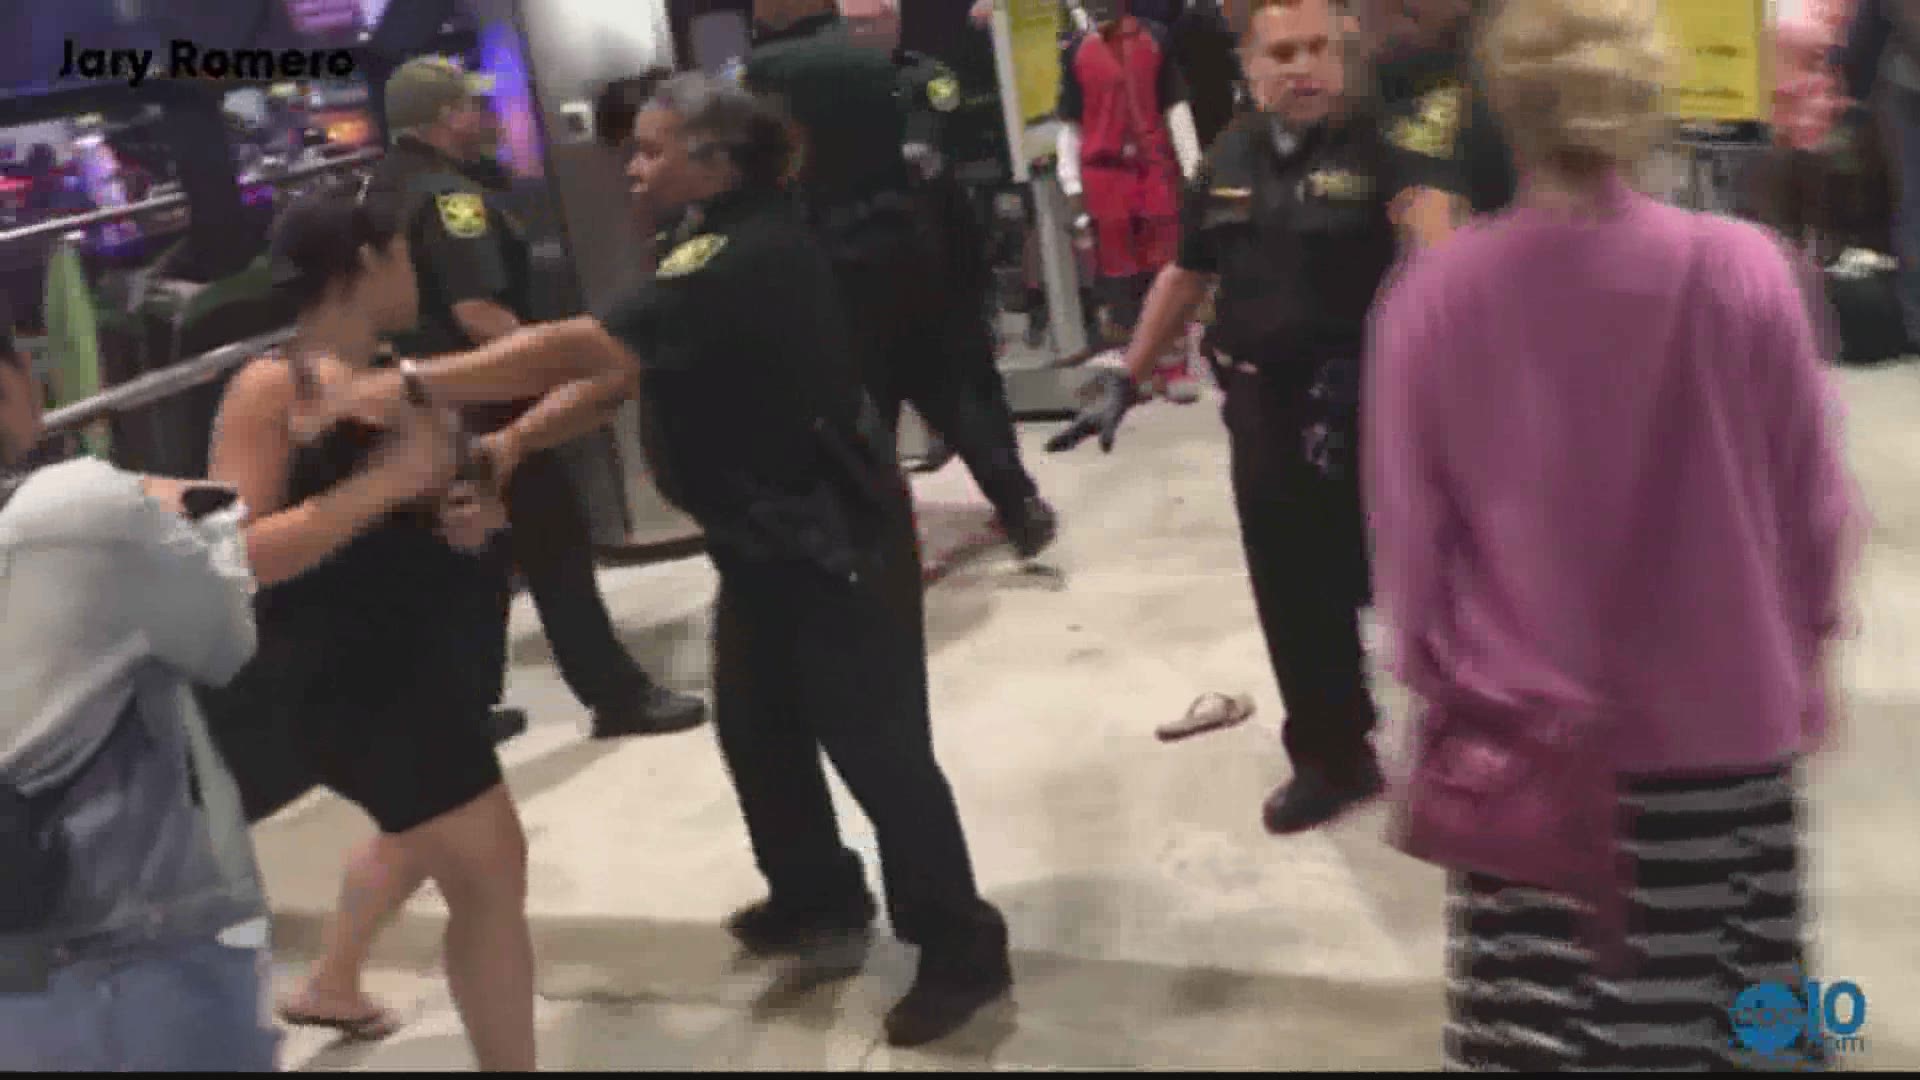 Passengers shared videos online of the commotion at Fort Lauderdale-Hollywood International Airport on Monday after several flights were abruptly cancelled (May 9, 2017)